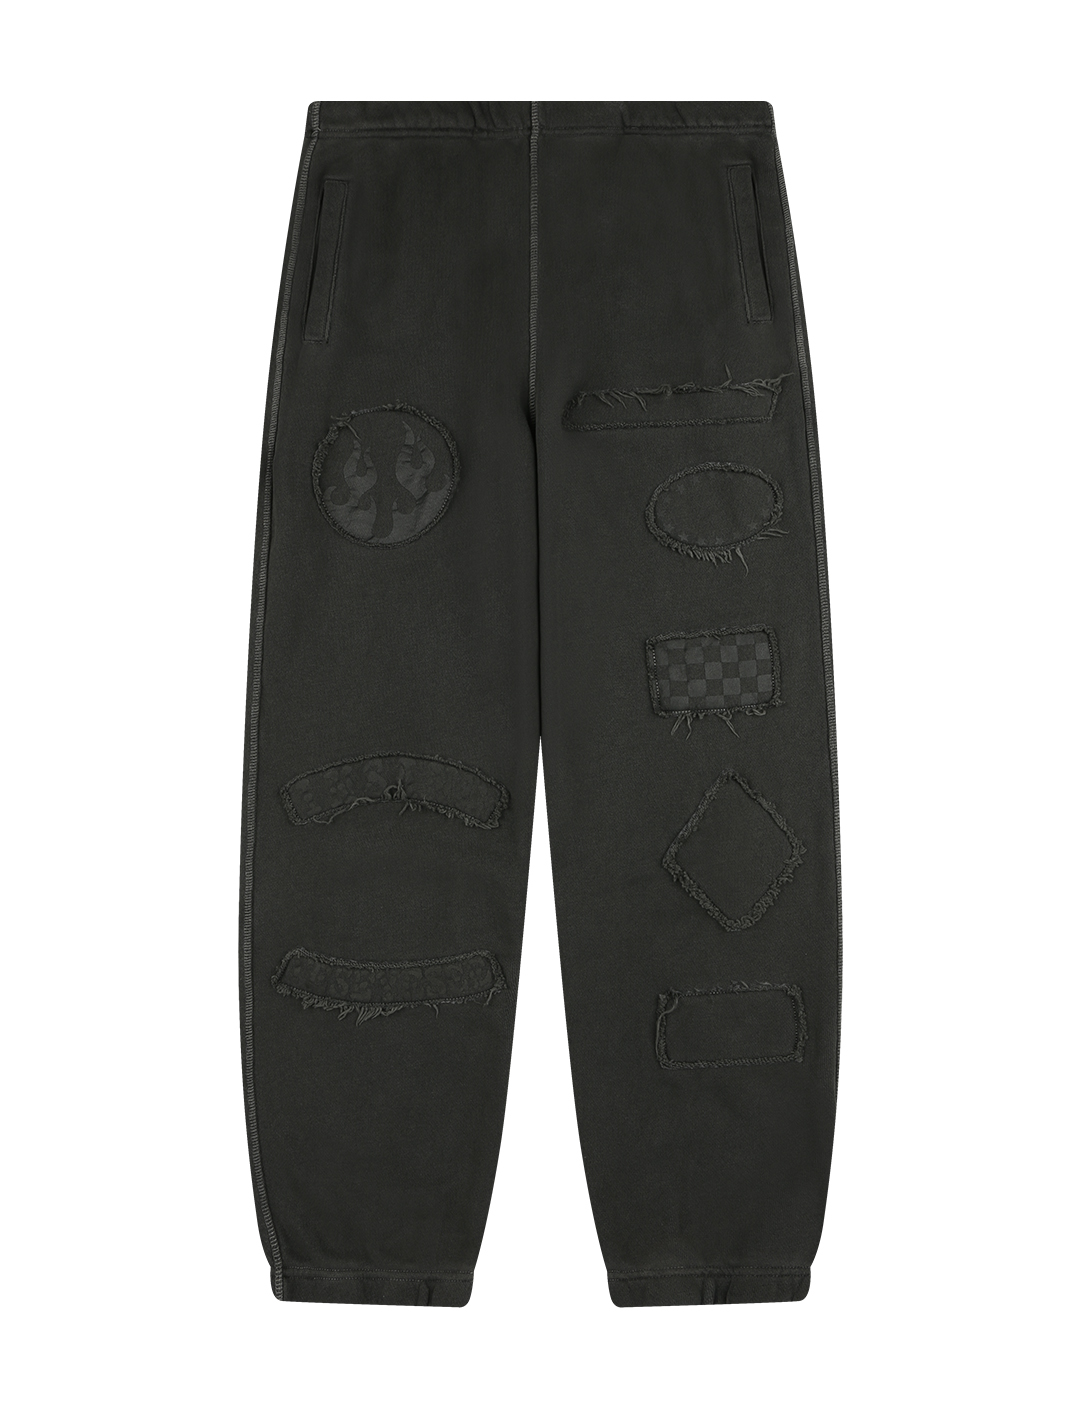 YESEYESEE X Insane Garage Pigment Patched Sweat Pants Charcoal